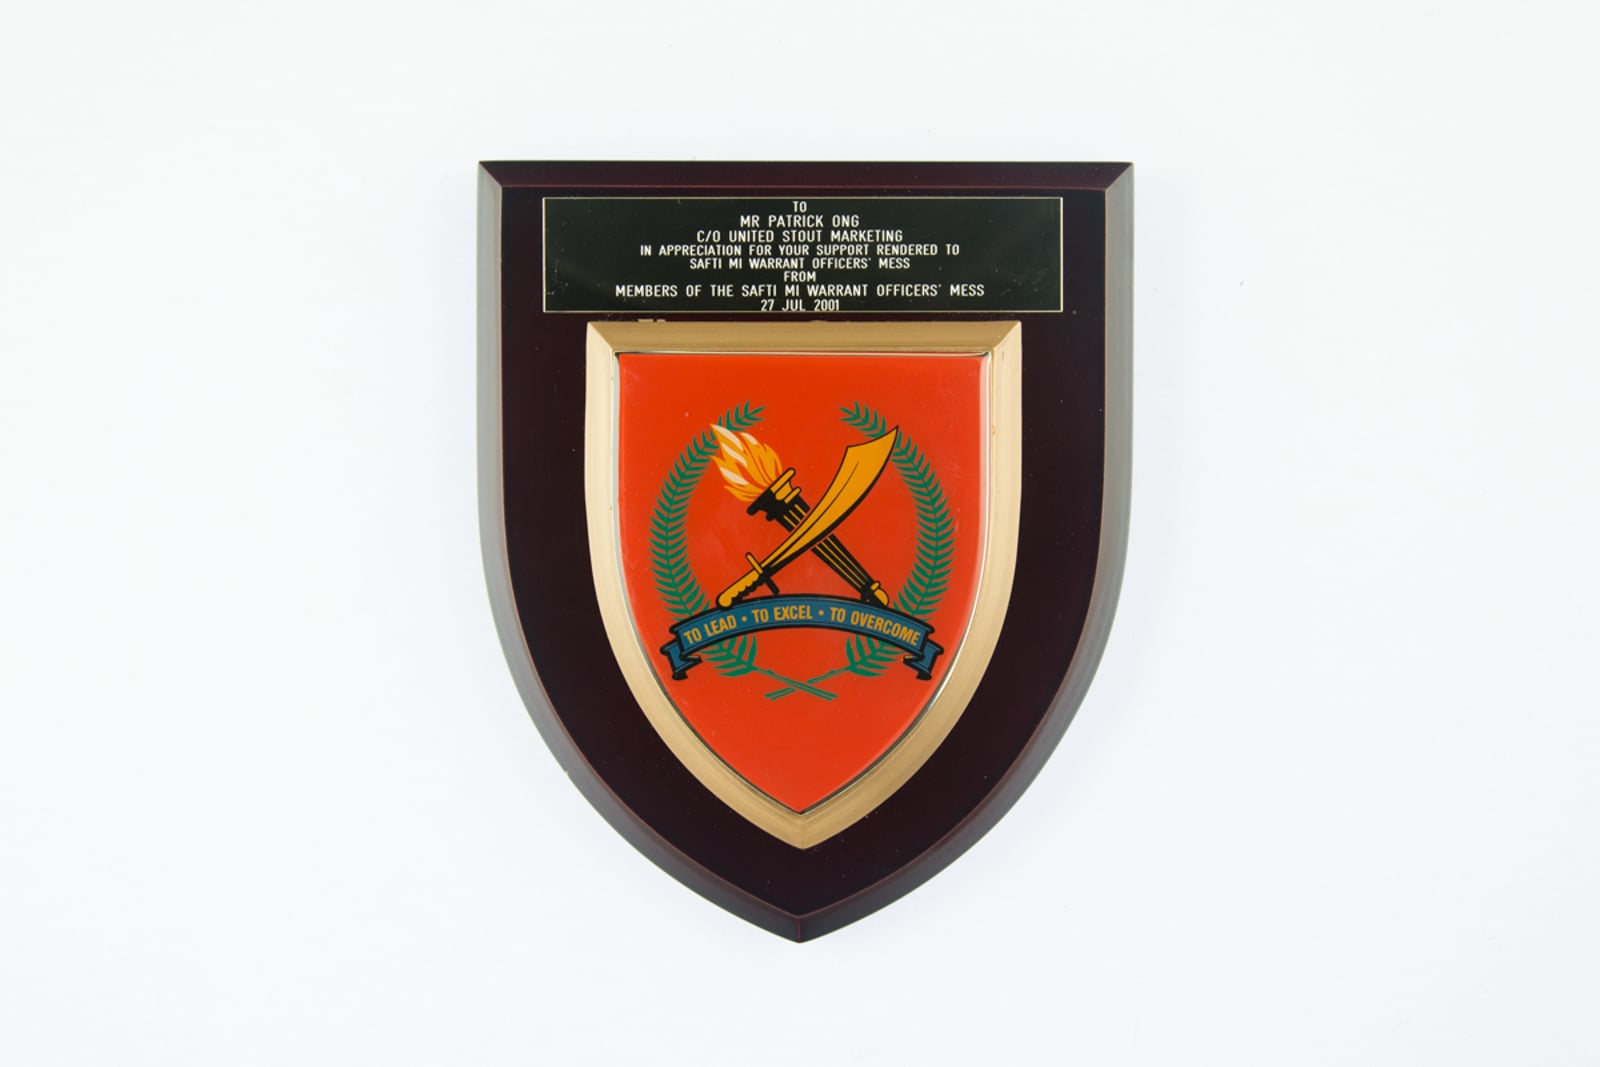 Members of the SAFTI M1 Warrant Officers' MESS Plaque 2001